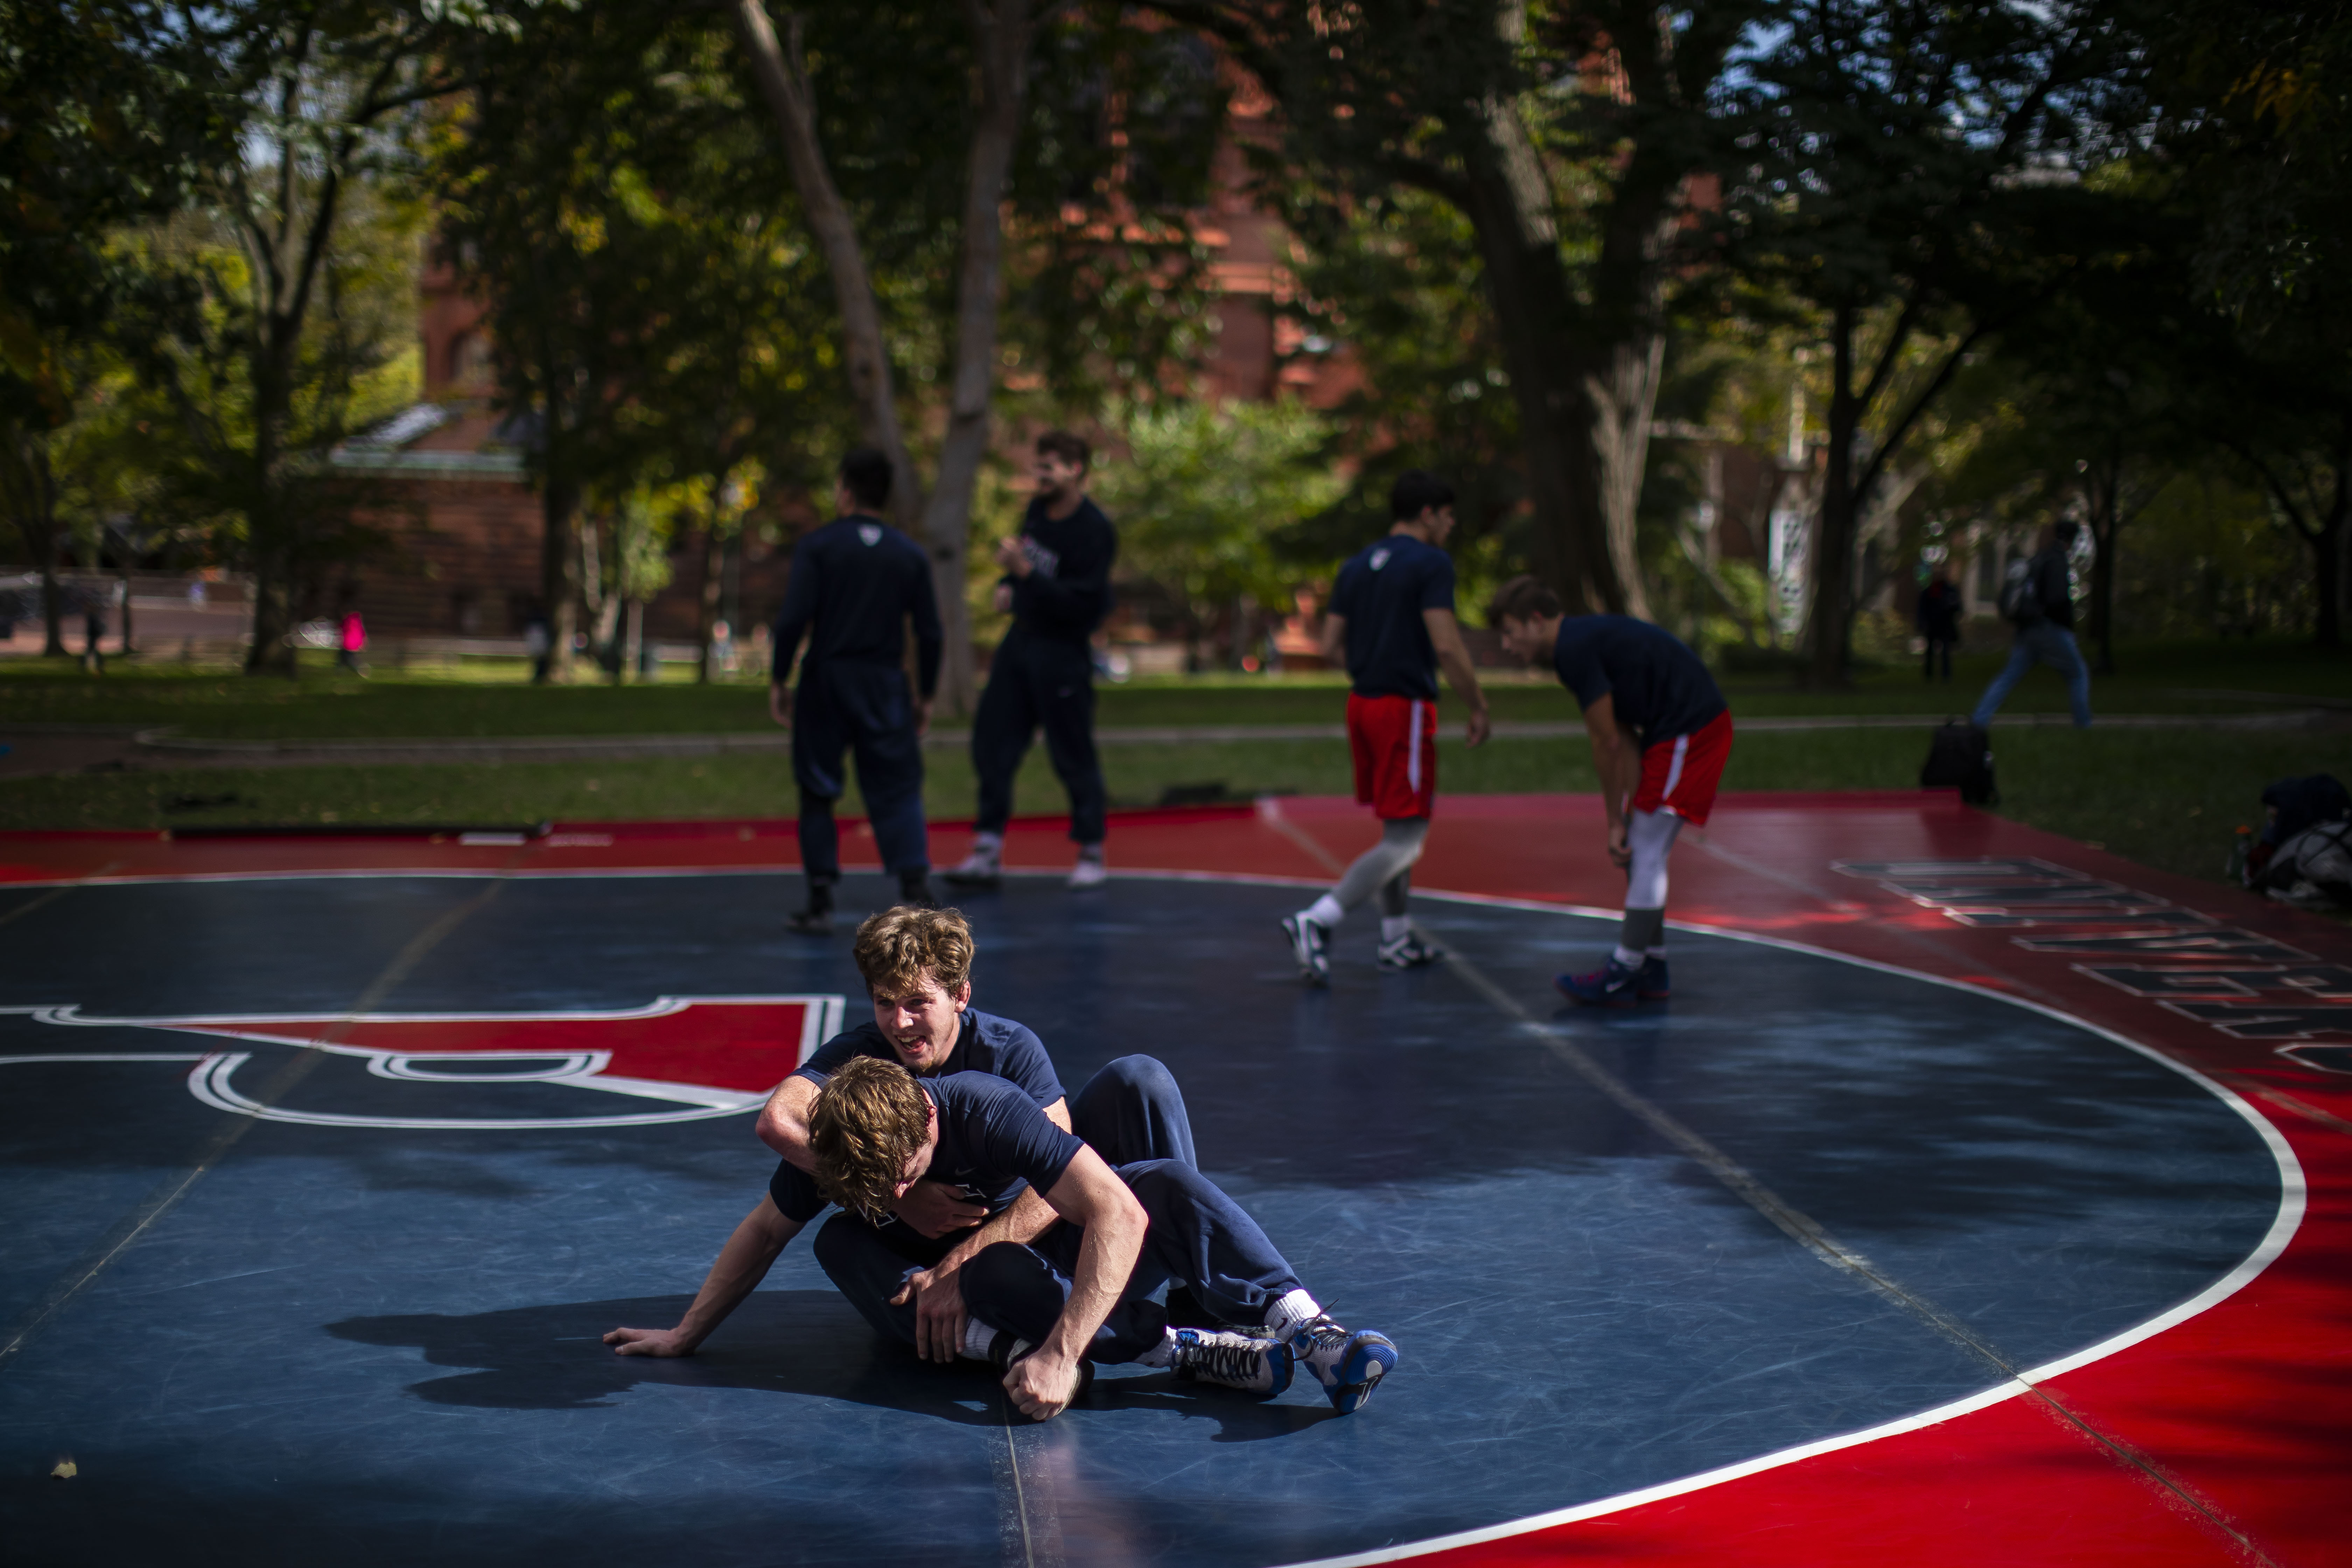 two-wrestlers-on-the-ground-during-outdoor-practice-with-trees-in-background